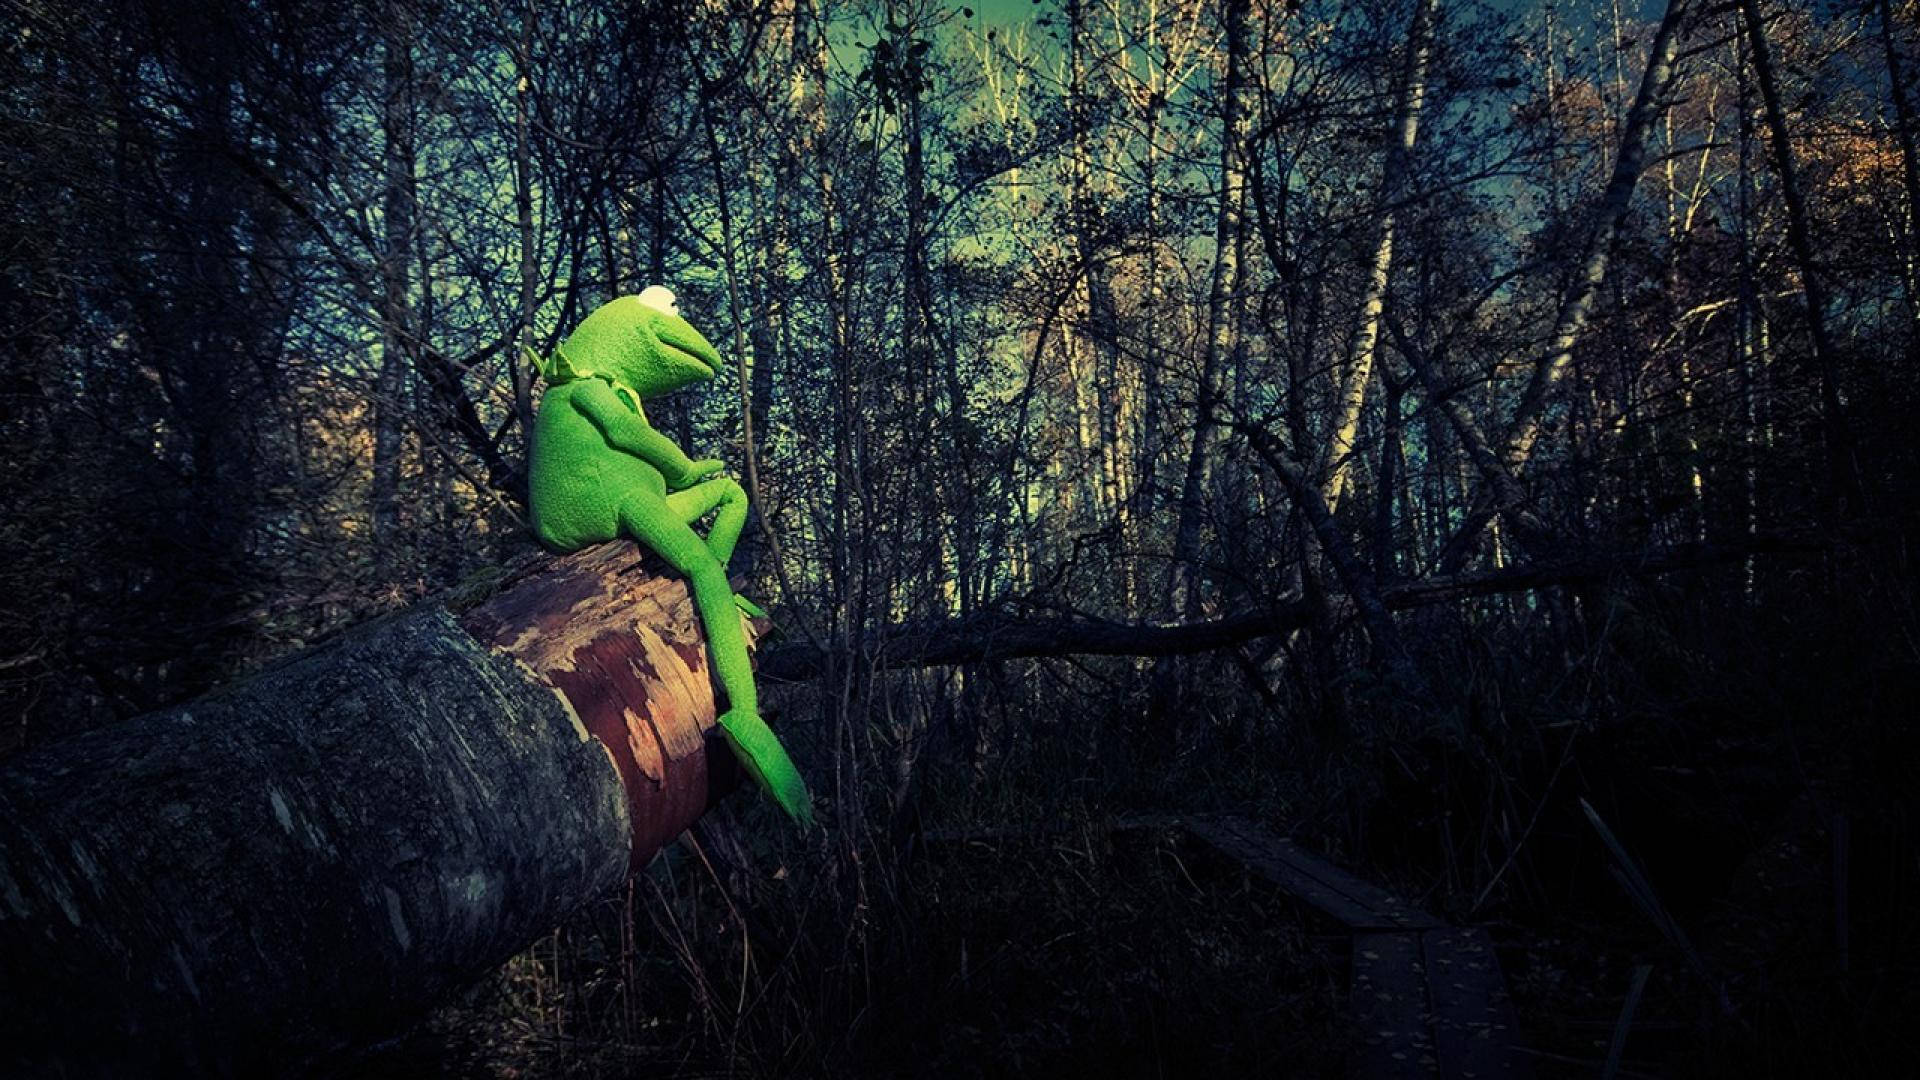 Top Kermit The Frog Wallpaper Full Hd K Free To Use